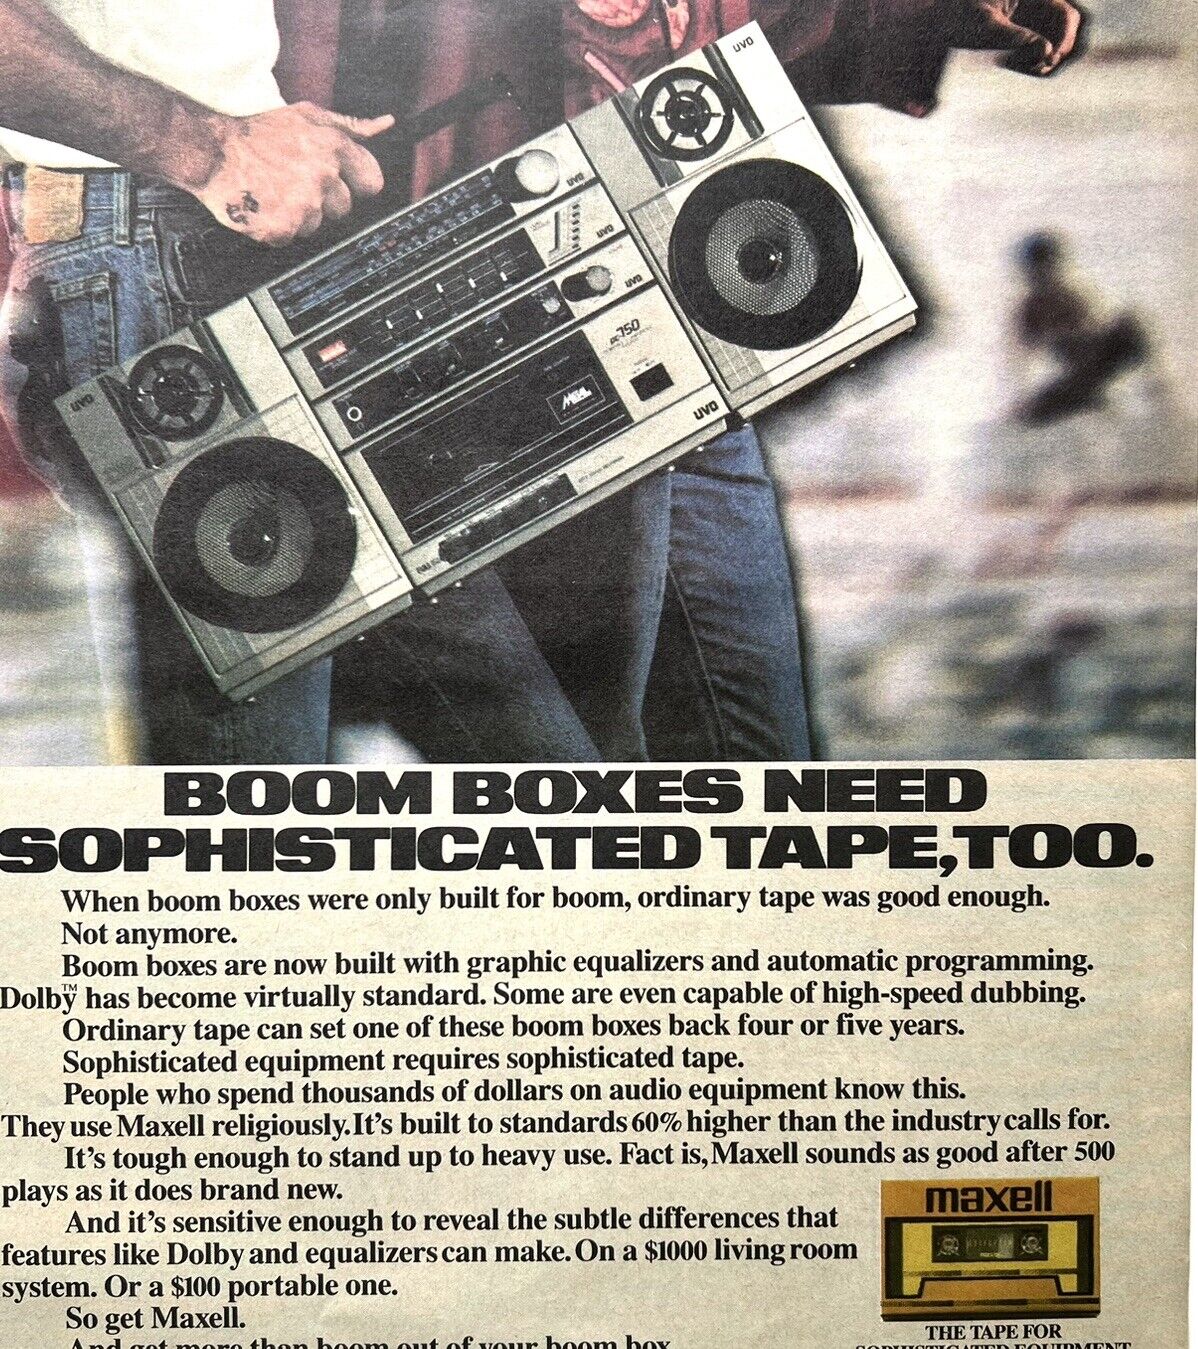 1985 Boom Boxes Maxell Casette Tape Vintage Print Ad/Poster 25x30cm RSM 457